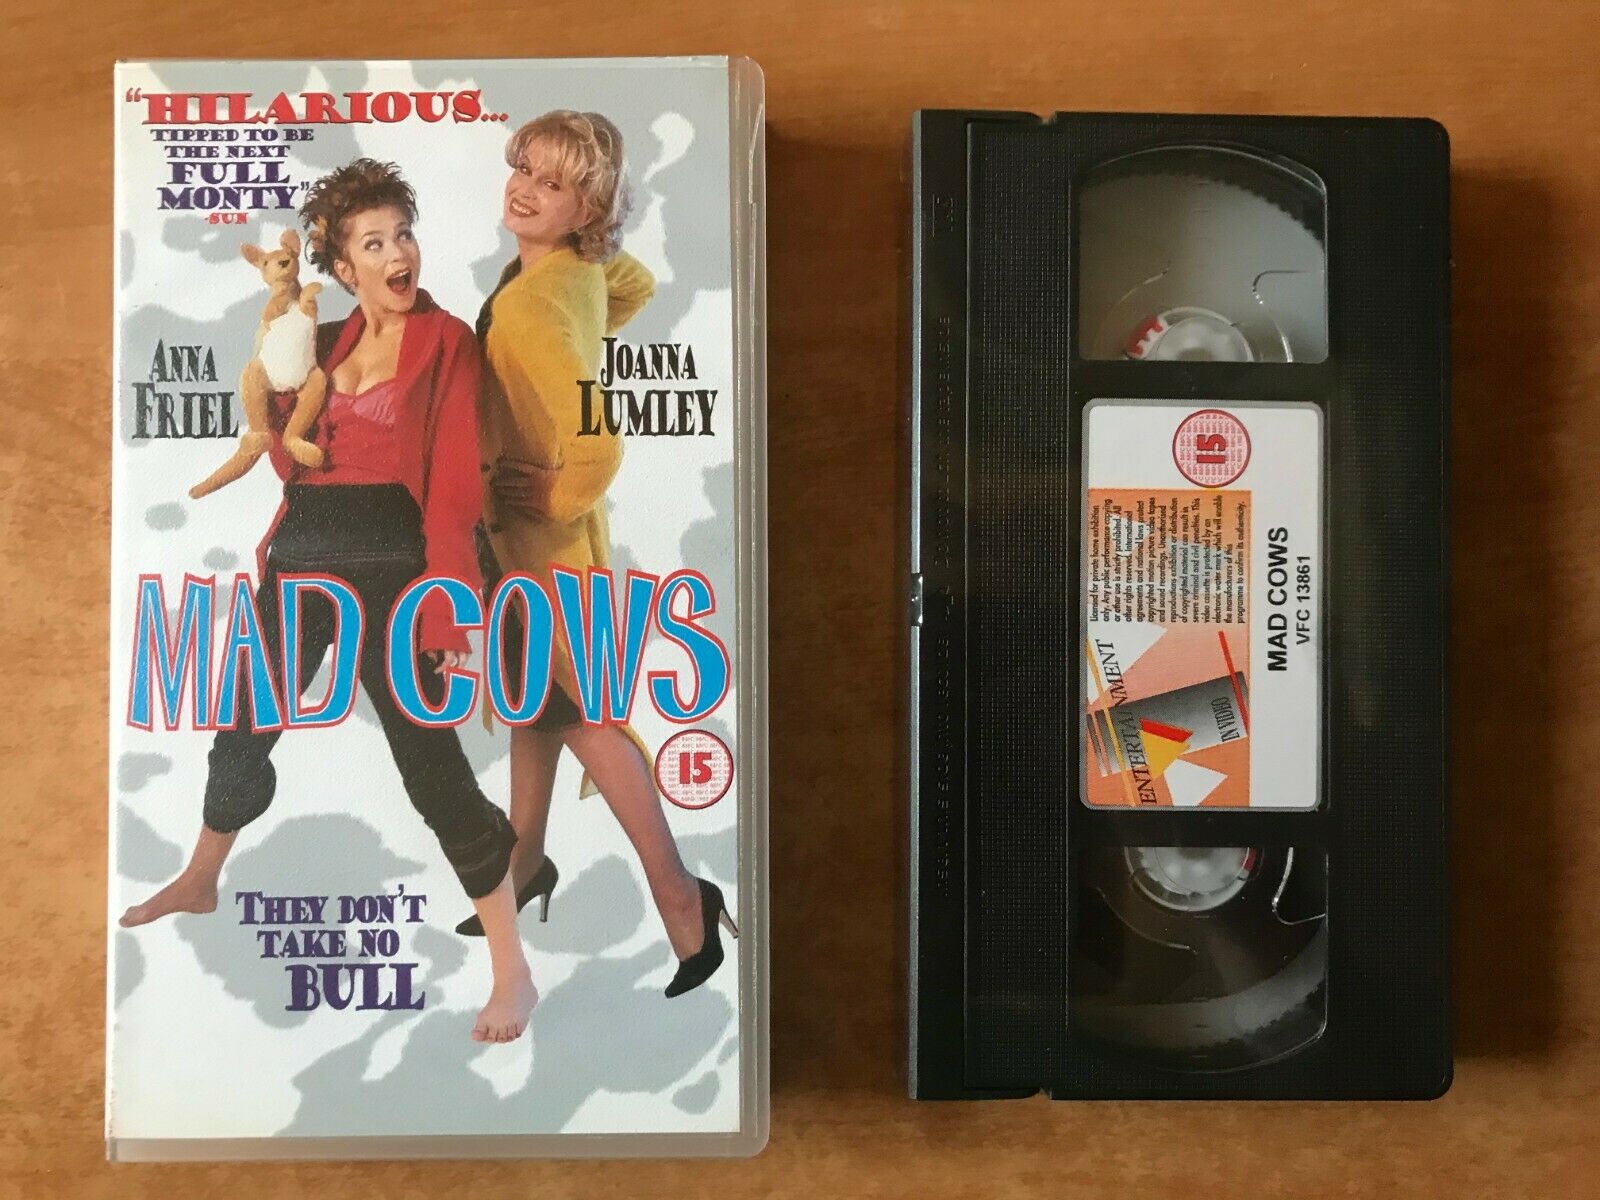 Mad Cows (1999): Comedy [Brand New Sealed] - Anna Friel / Joanna Lumley - VHS-